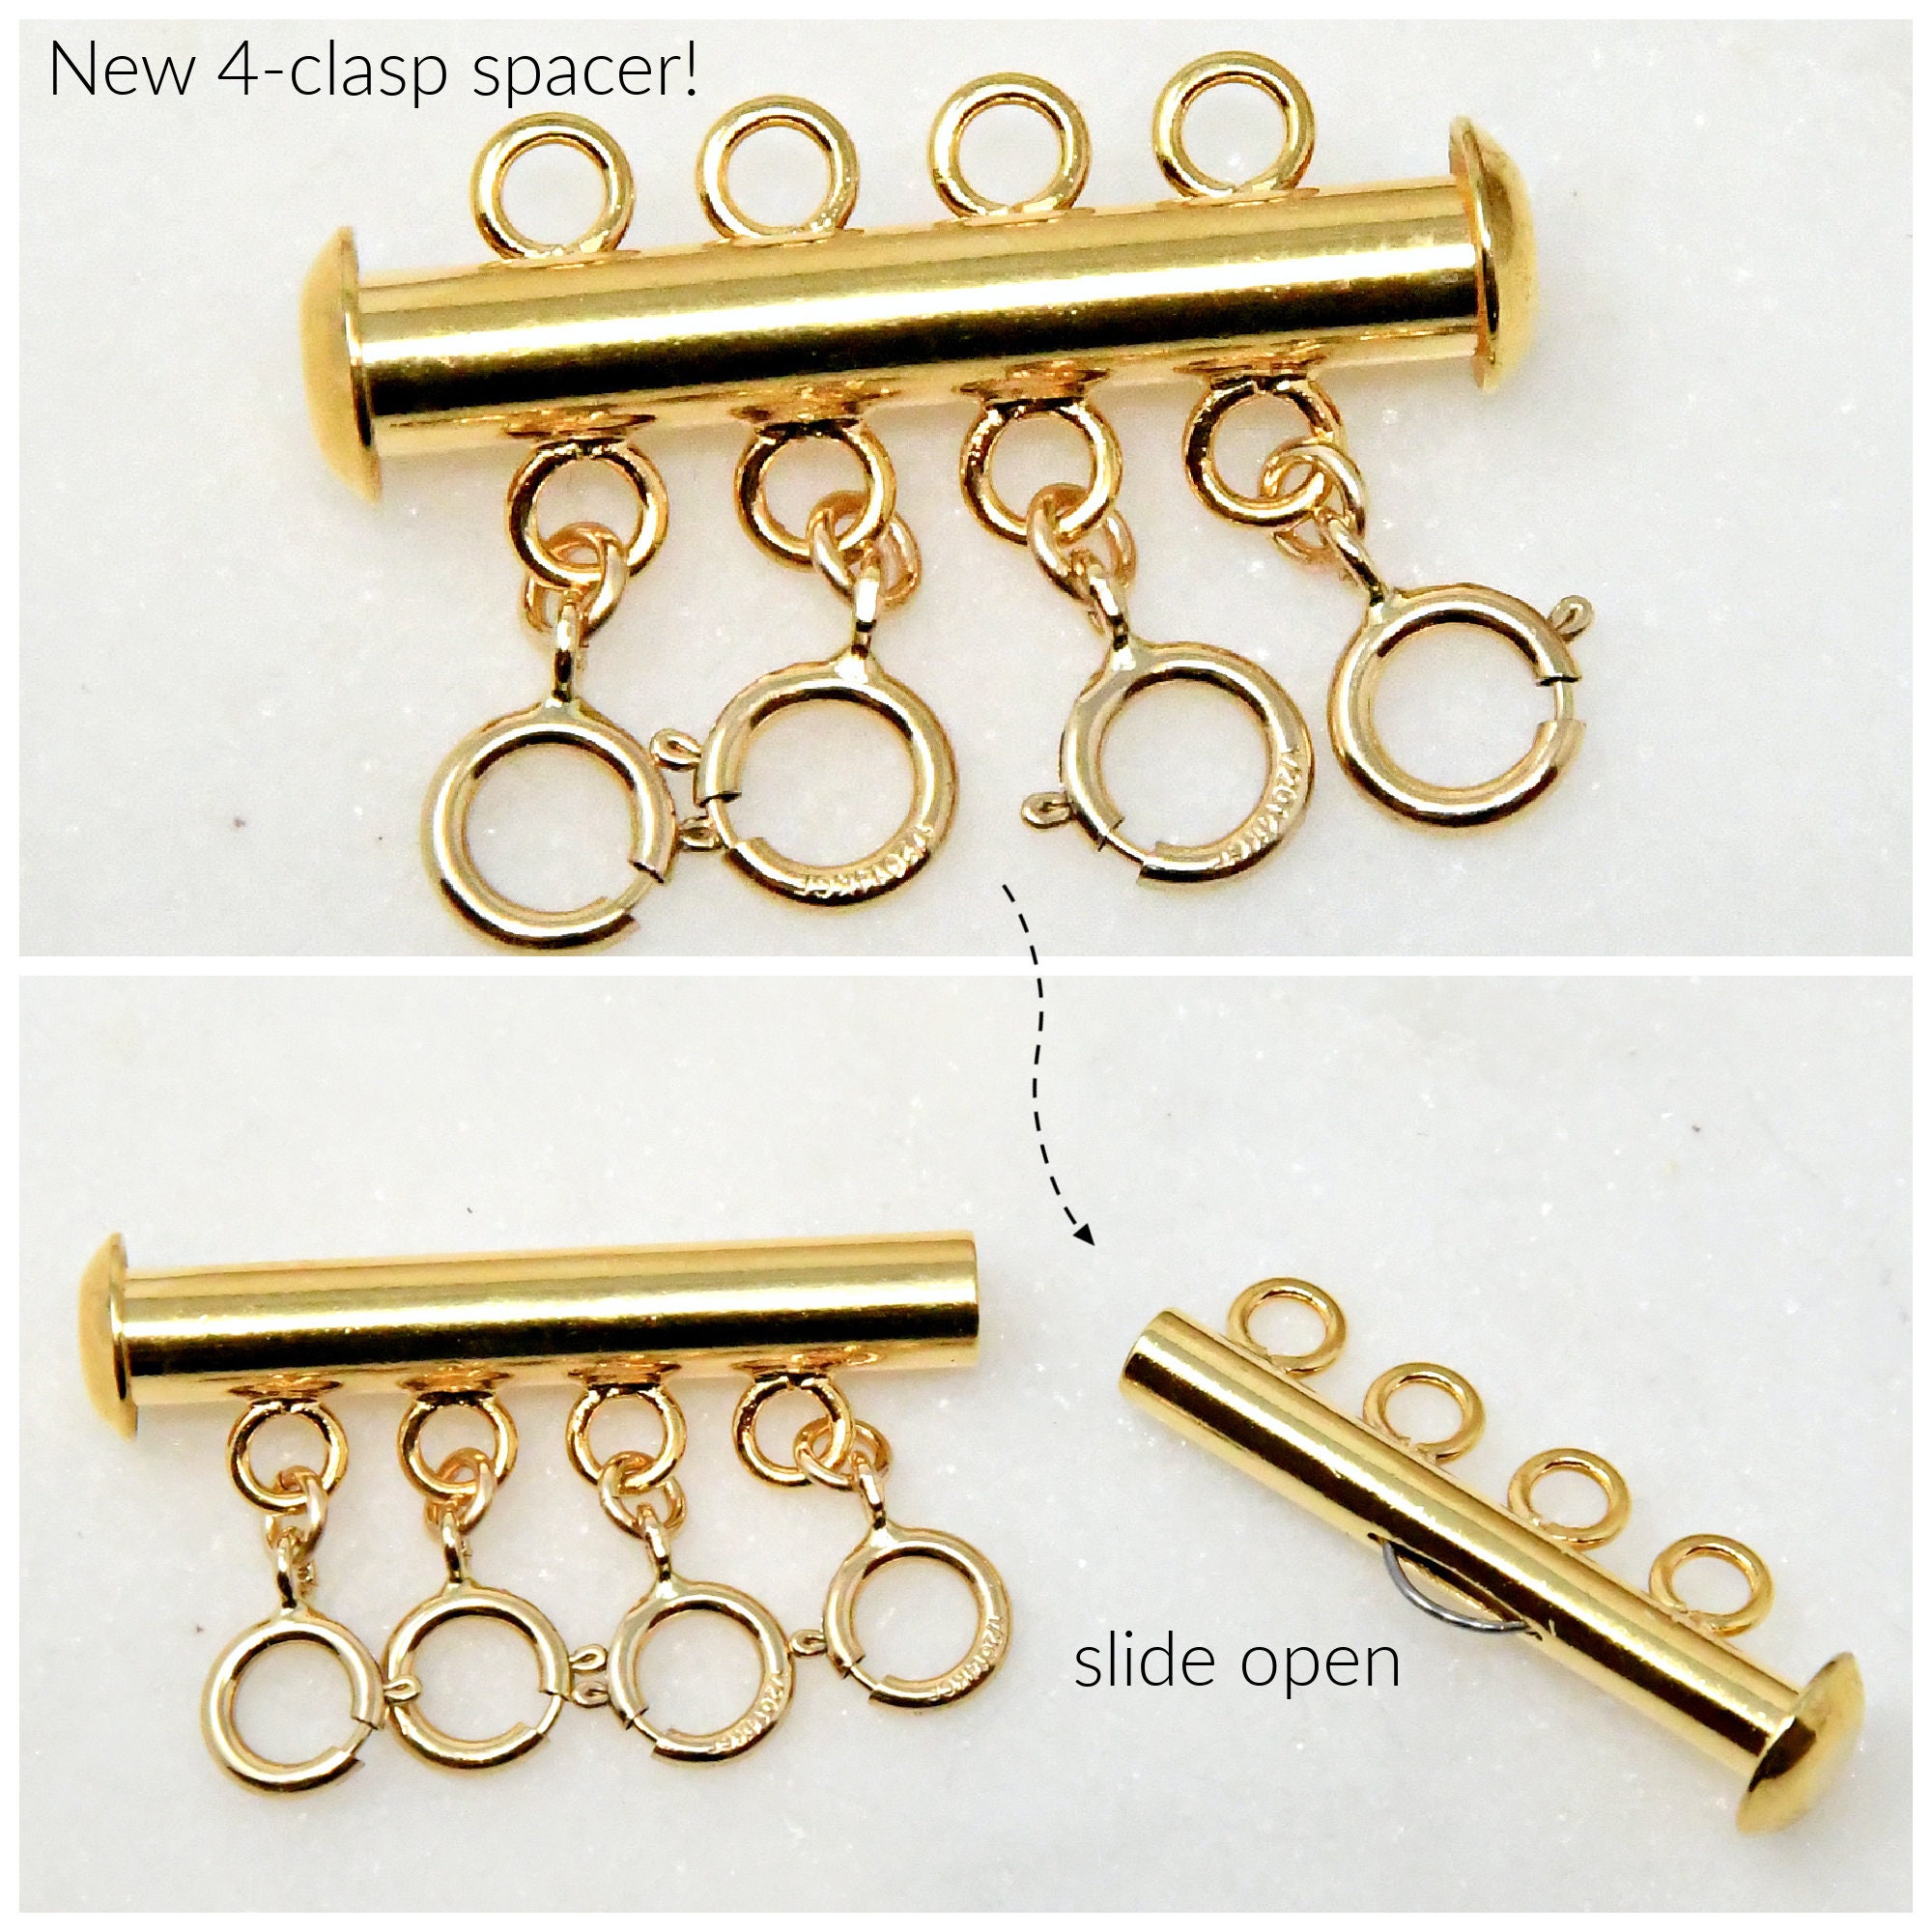 1pcs Layered Necklace Clasp Necklace Separator for Layering, Multiple Necklace  Clasps and Closures for Women,Layered Necklace Clasp 18K Golden Necklace  SeparatorFor Layering, Multiple Necklace Clasps And Closures For  WomenJewelry Makin,Glossy Two-row